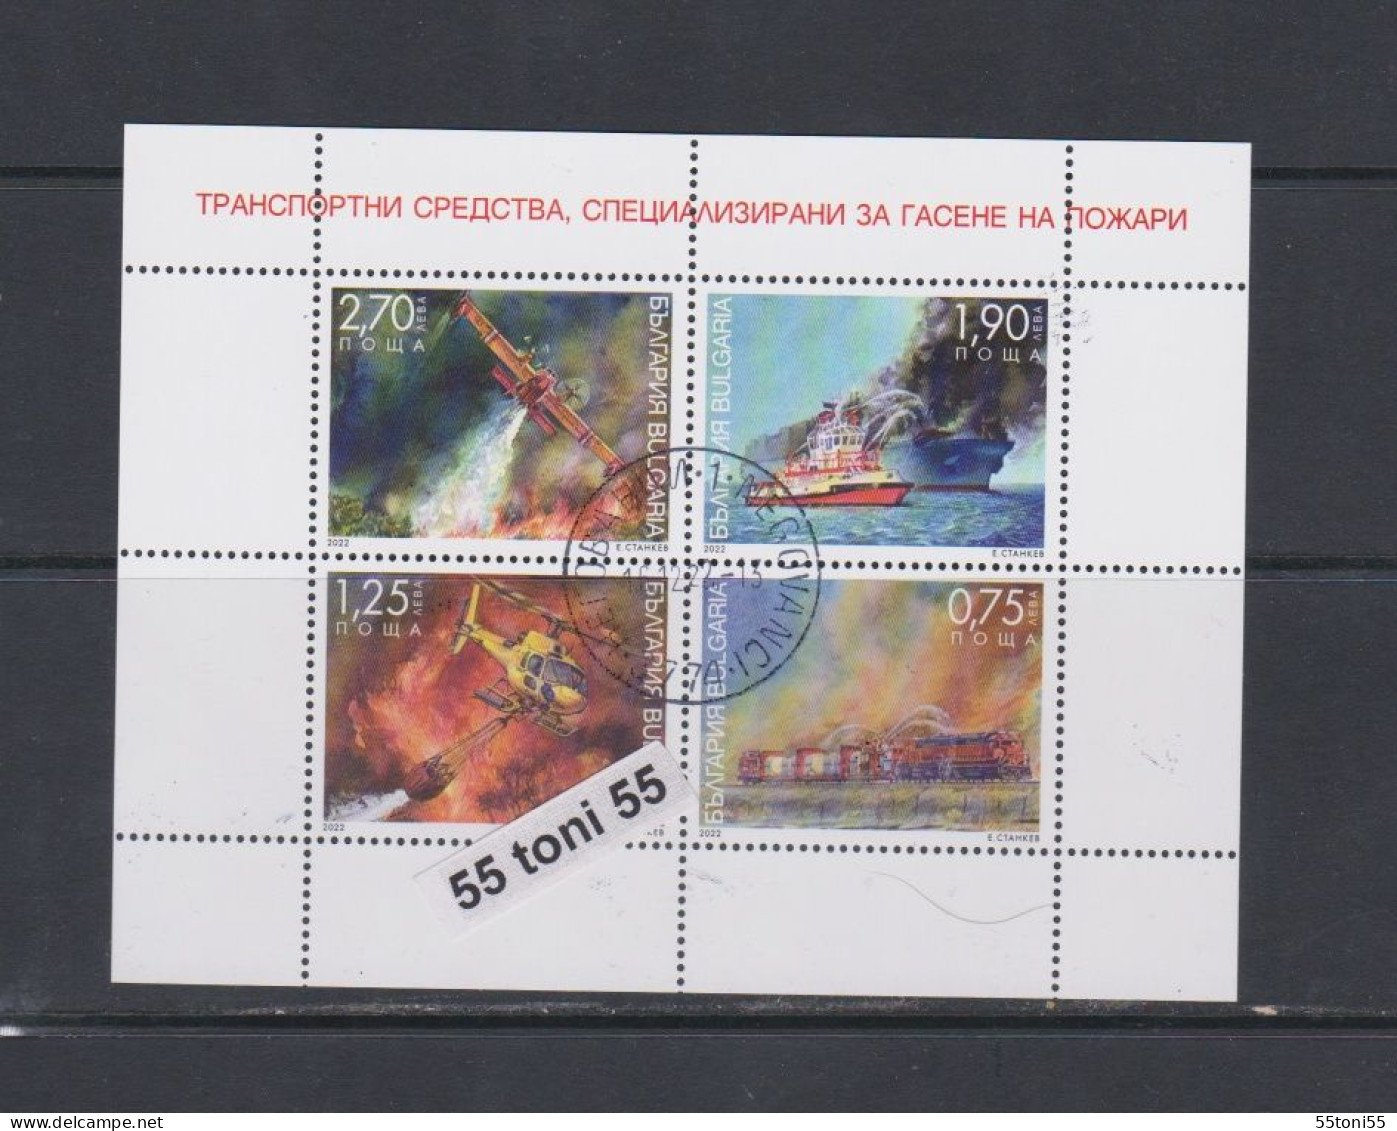 2022 Fire Fighting Vehicles  S/S- Used (O) Bulgaria/Bulgarie - Used Stamps